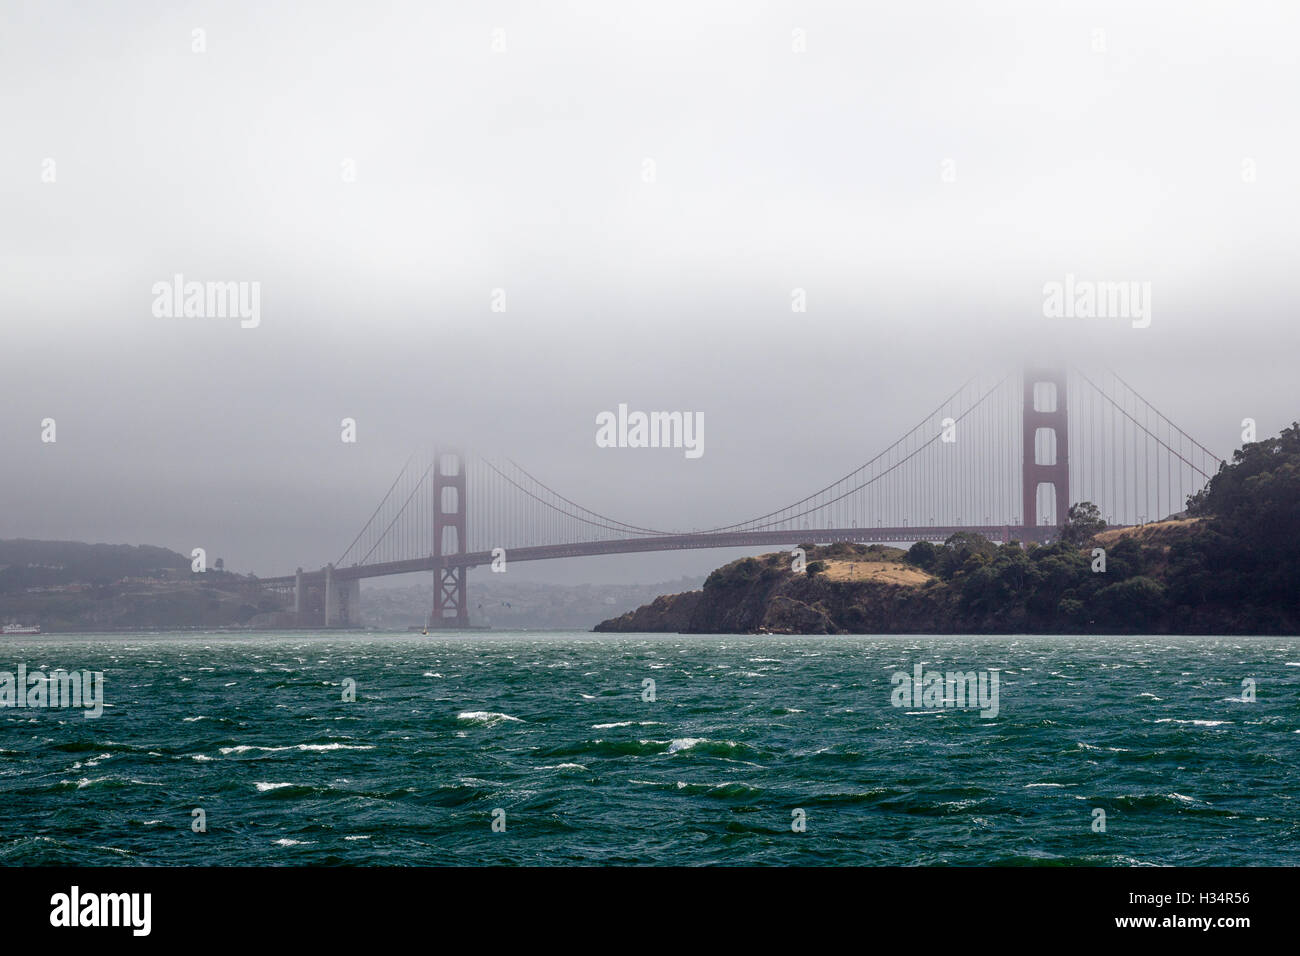 View from Sausalito to the Golden Gate Bridge in San Francisco, California, USA on a foggy day. Stock Photo